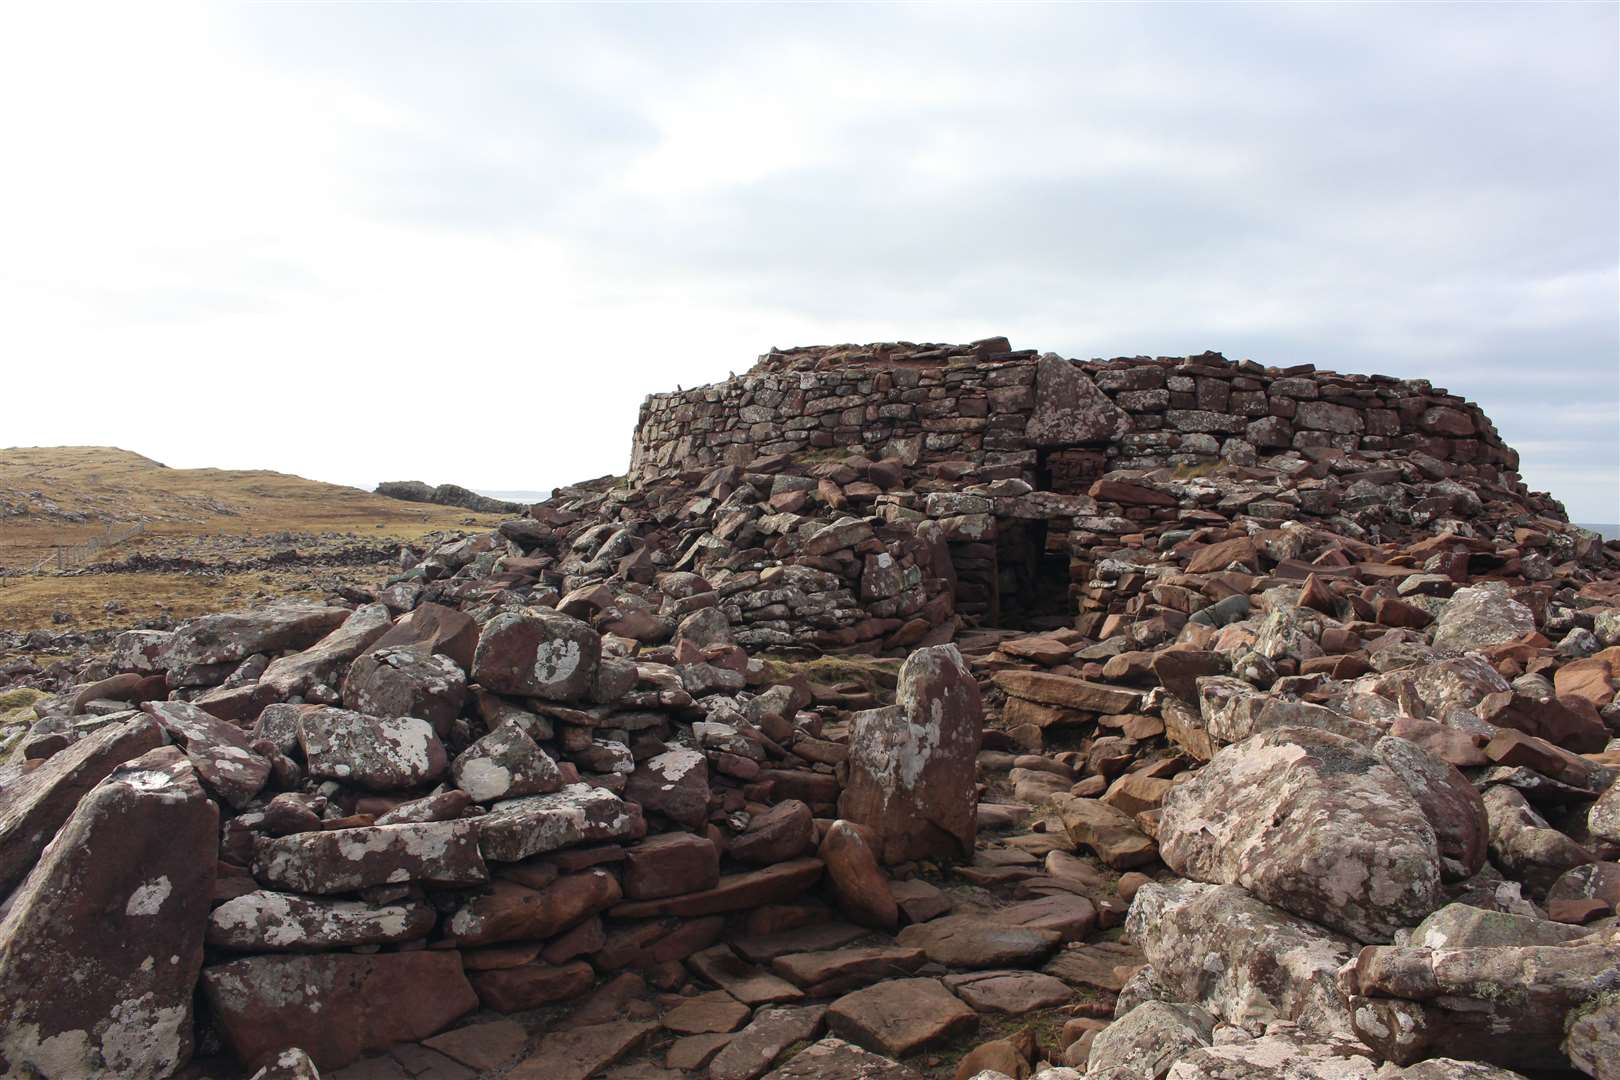 The entrance to the broch.